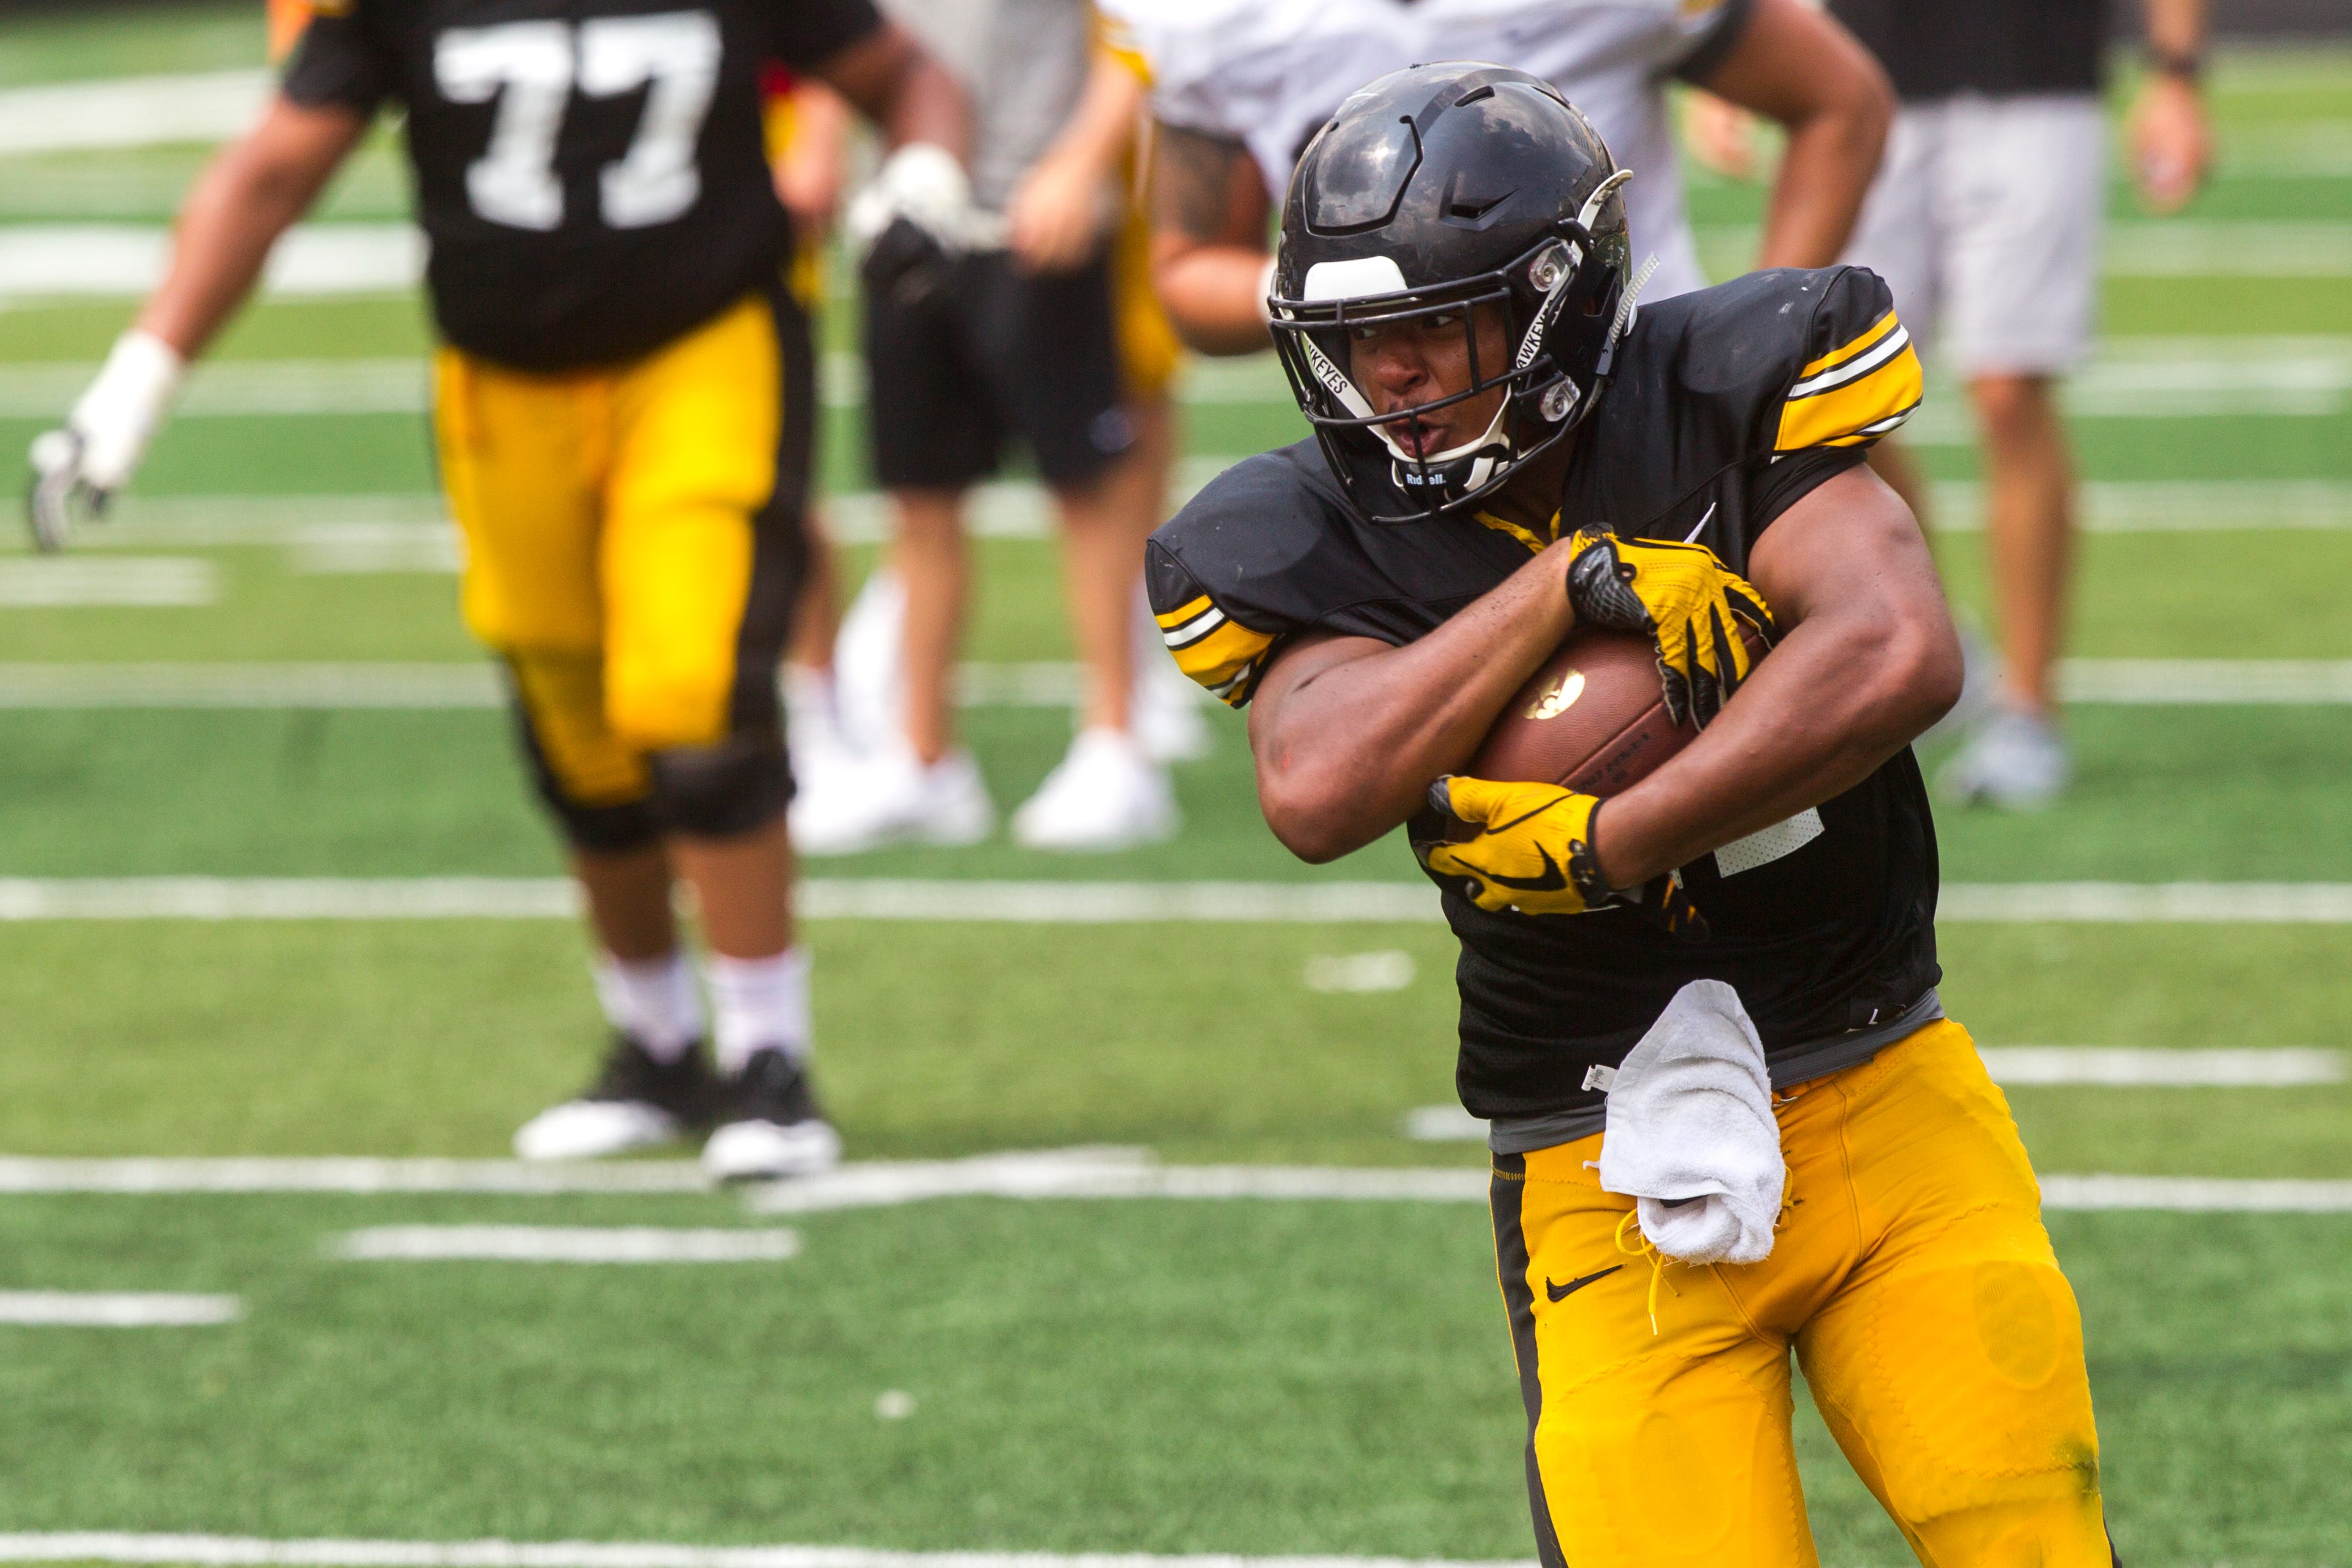 Iowa running back Ivory Kelly-Martin protects the ball during a Kids Day practice on Saturday, Aug. 11, 2018, at Kinnick Stadium in Iowa City.